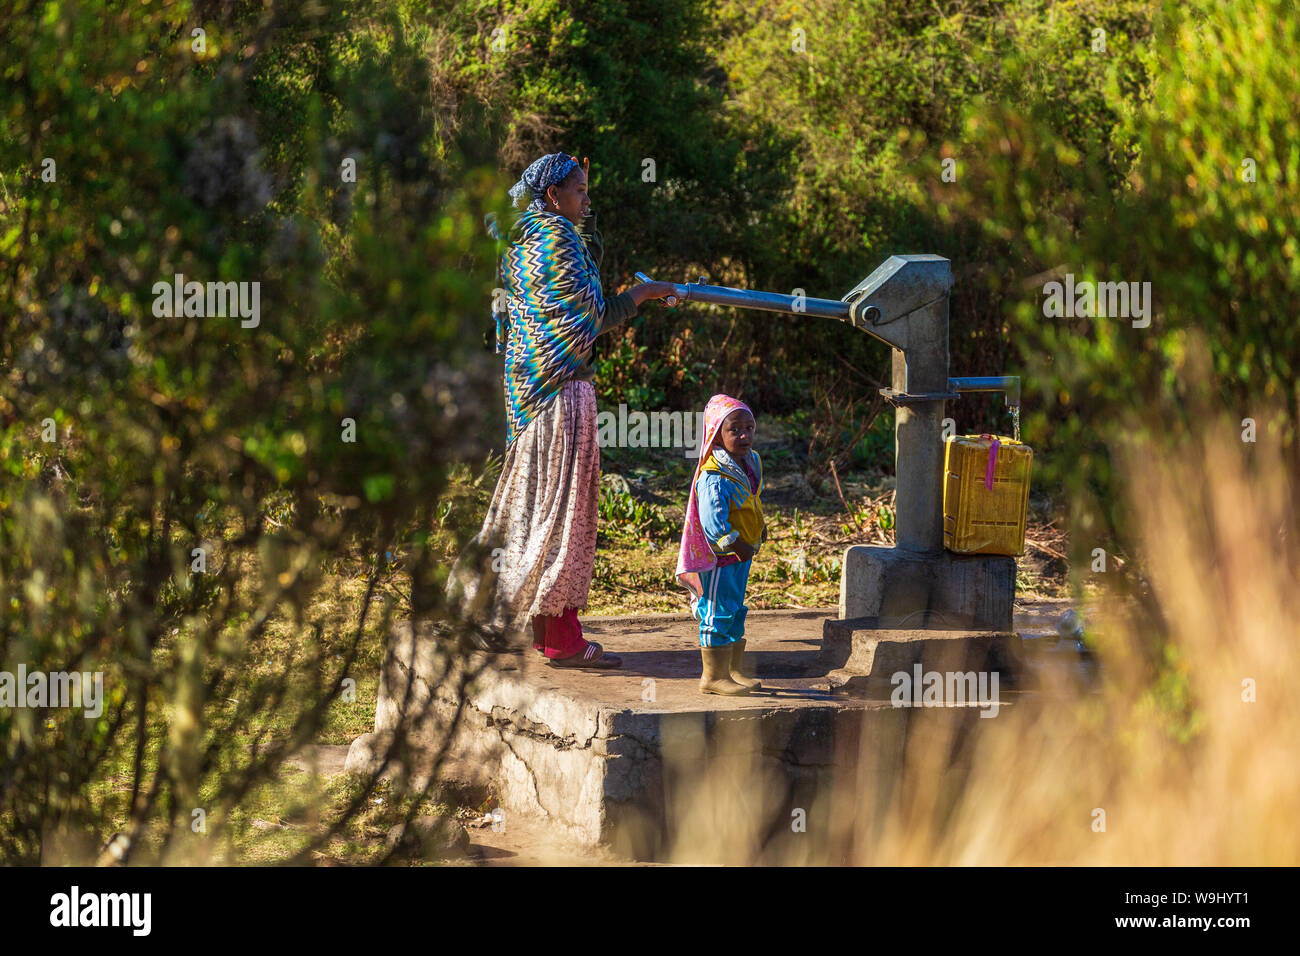 OROMIA, ETHIOPIA-JAN 21, 2019: Unidentified mother with child pumping water from a source. Stock Photo